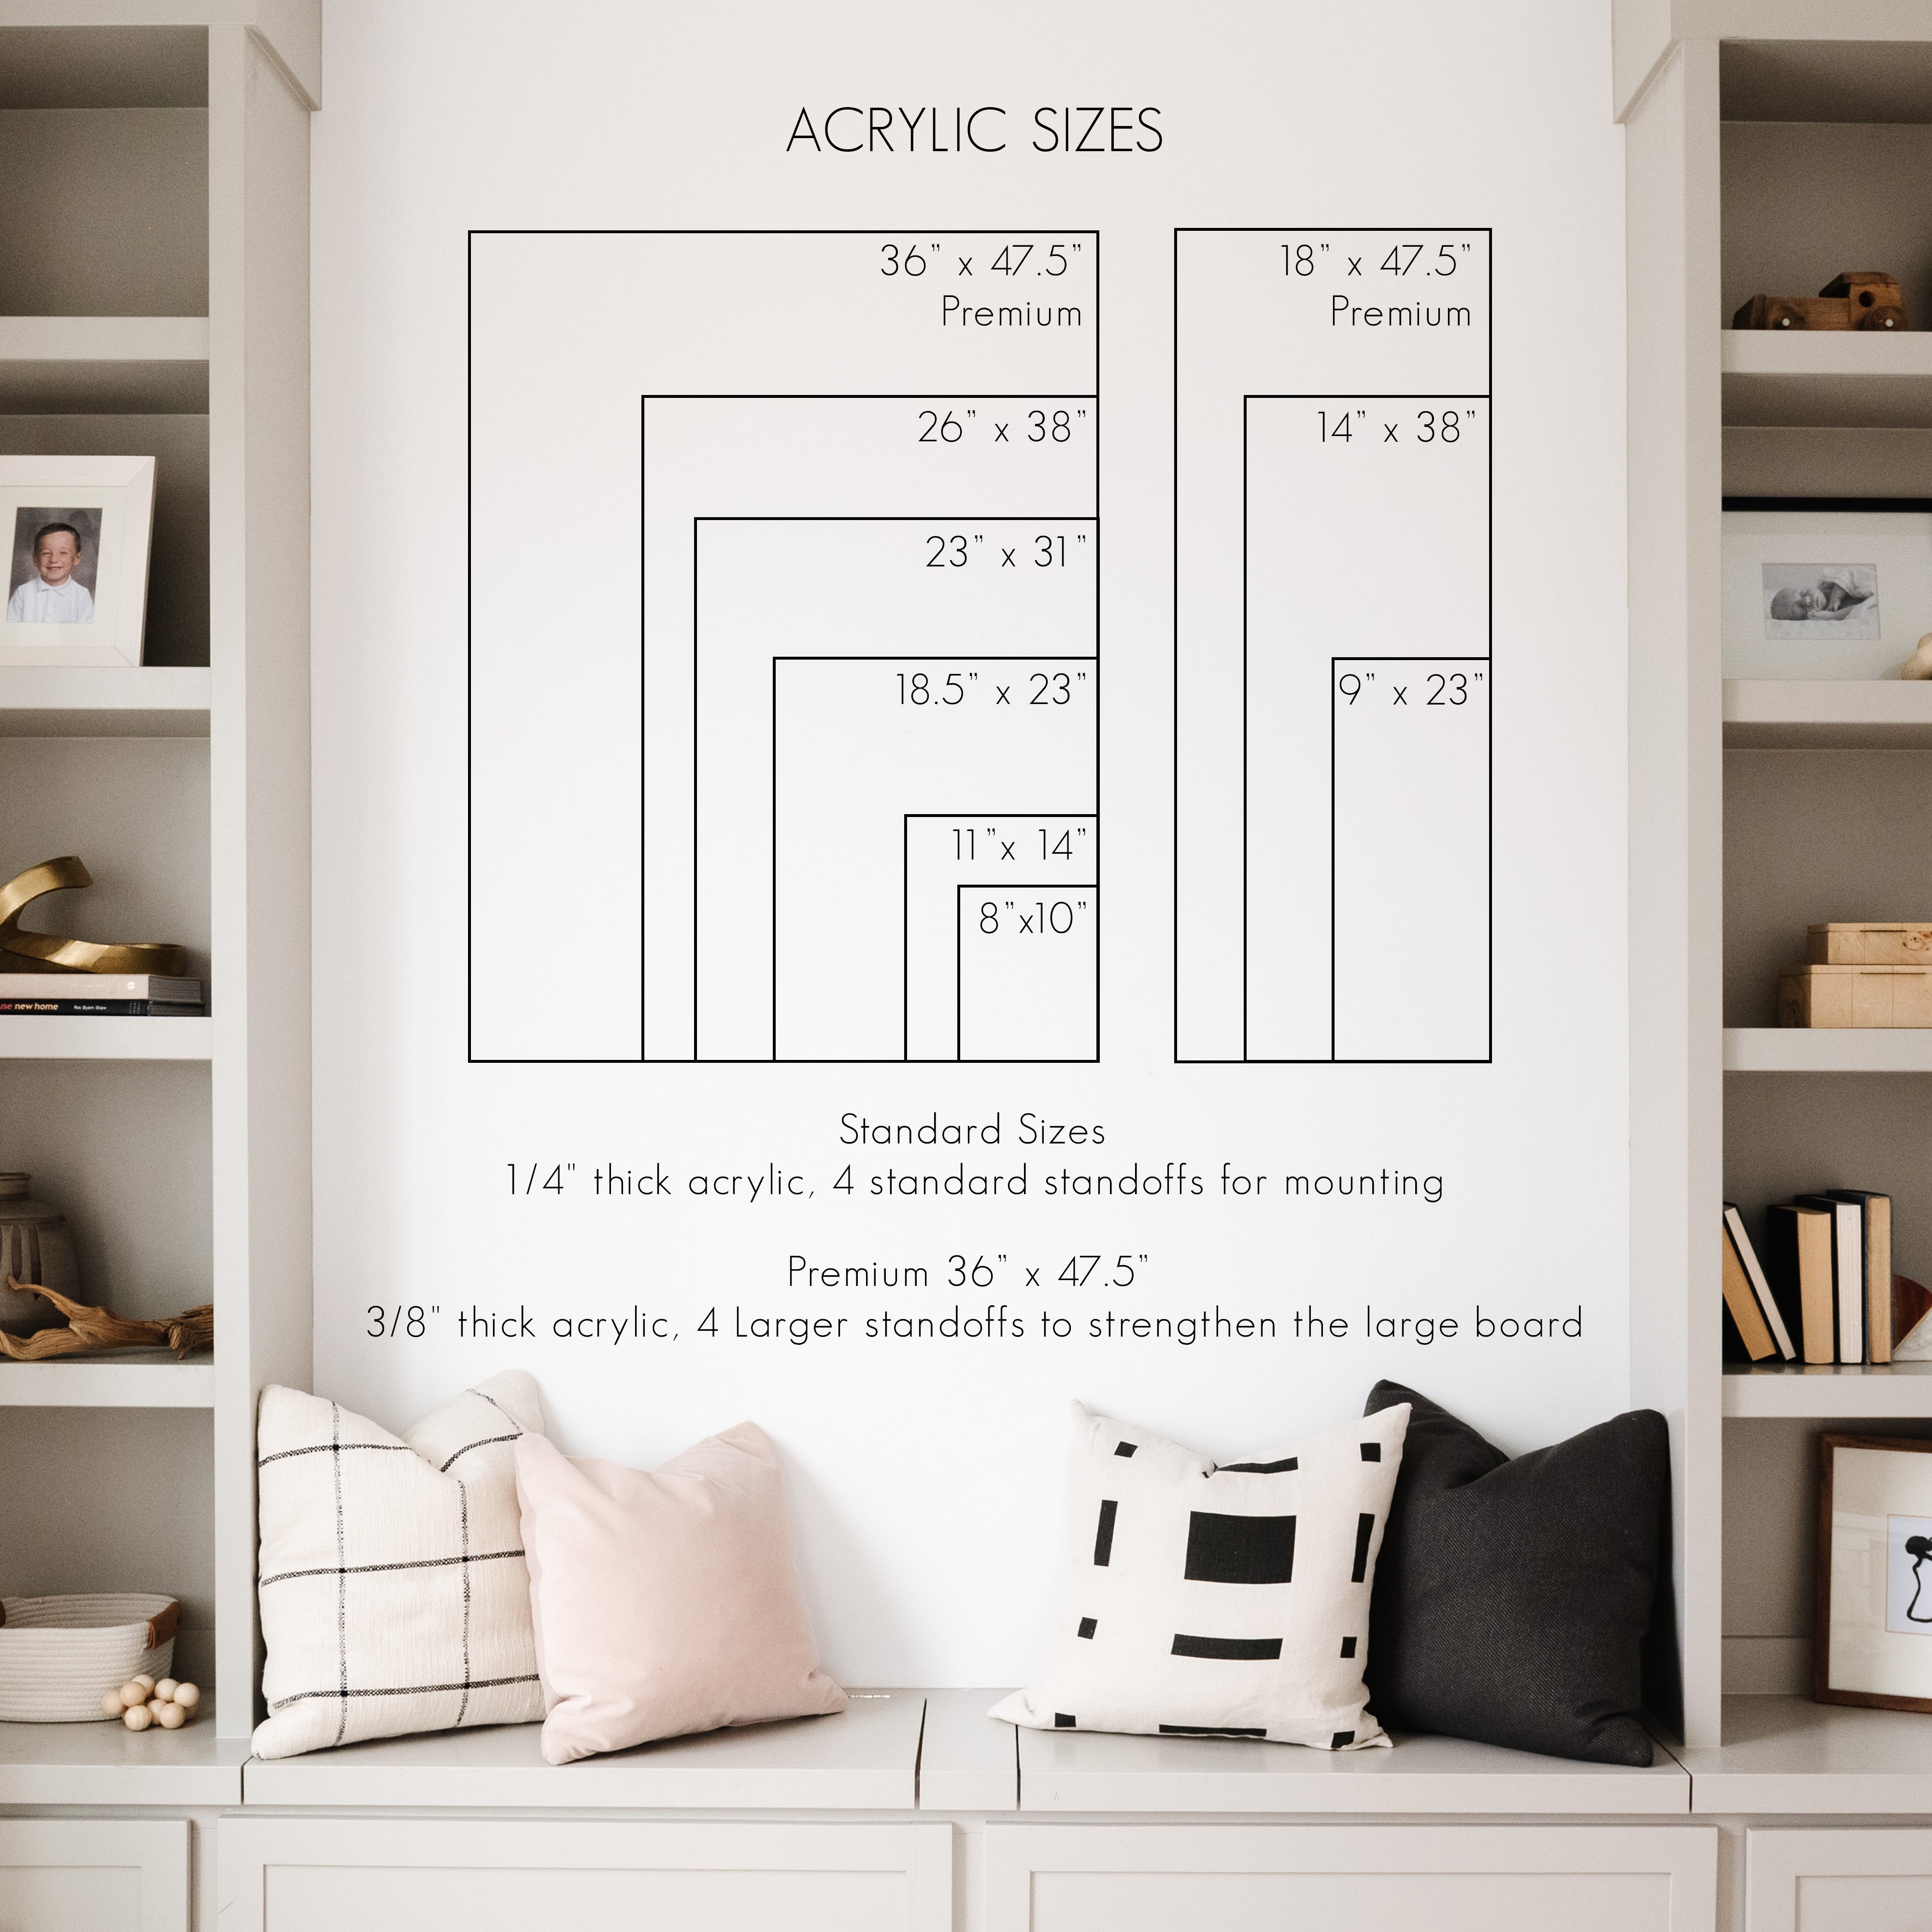 Monthly Frosted Acrylic Calendar + 2 Sections | Vertical Pennington